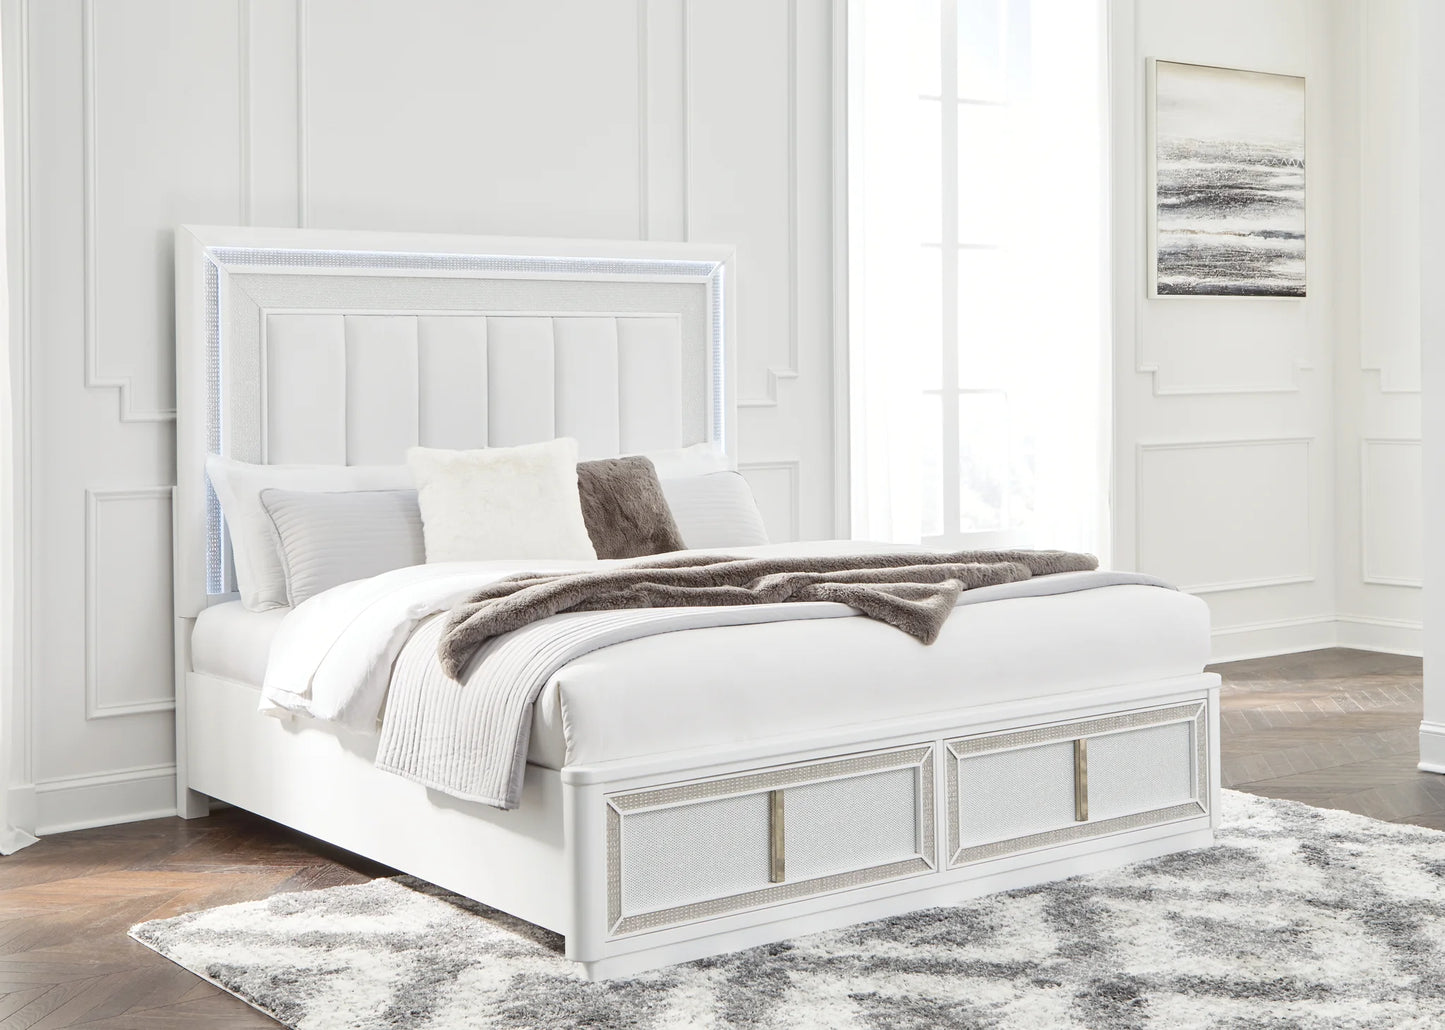 Chalanna - White - King Upholstered Storage Bed